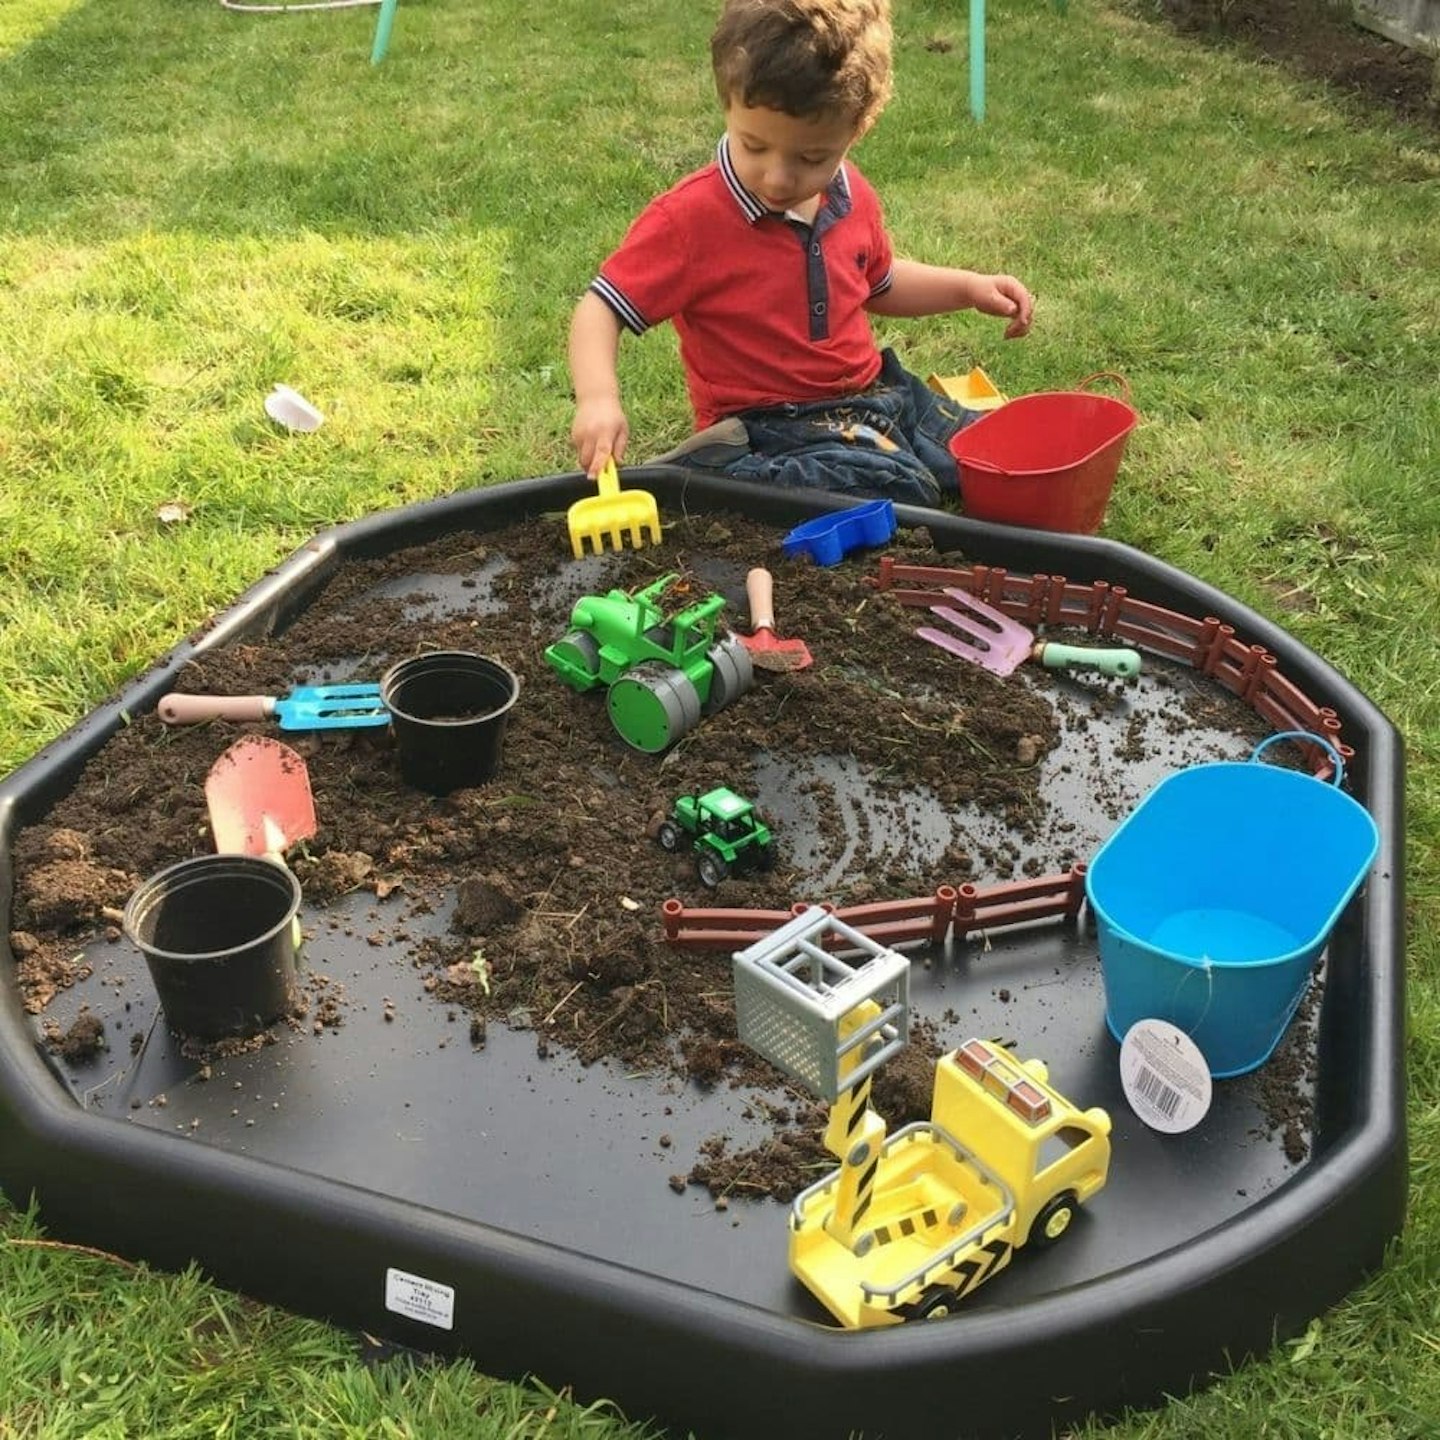 My Love for All Things Tuff Tray - Why I Recommend this Toy and